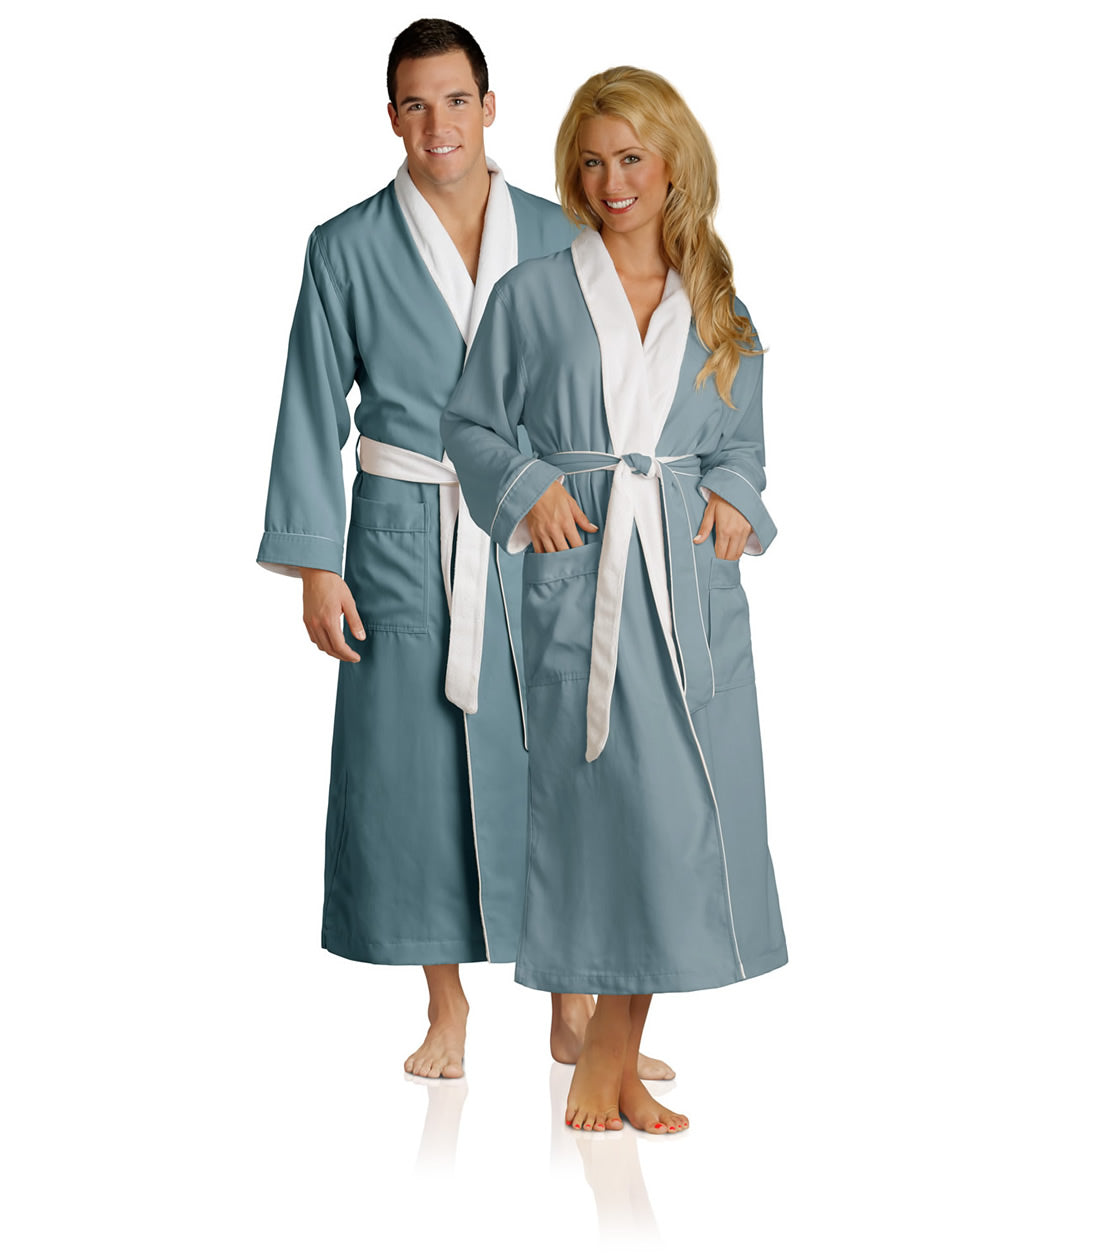 Spa Robes for Couples